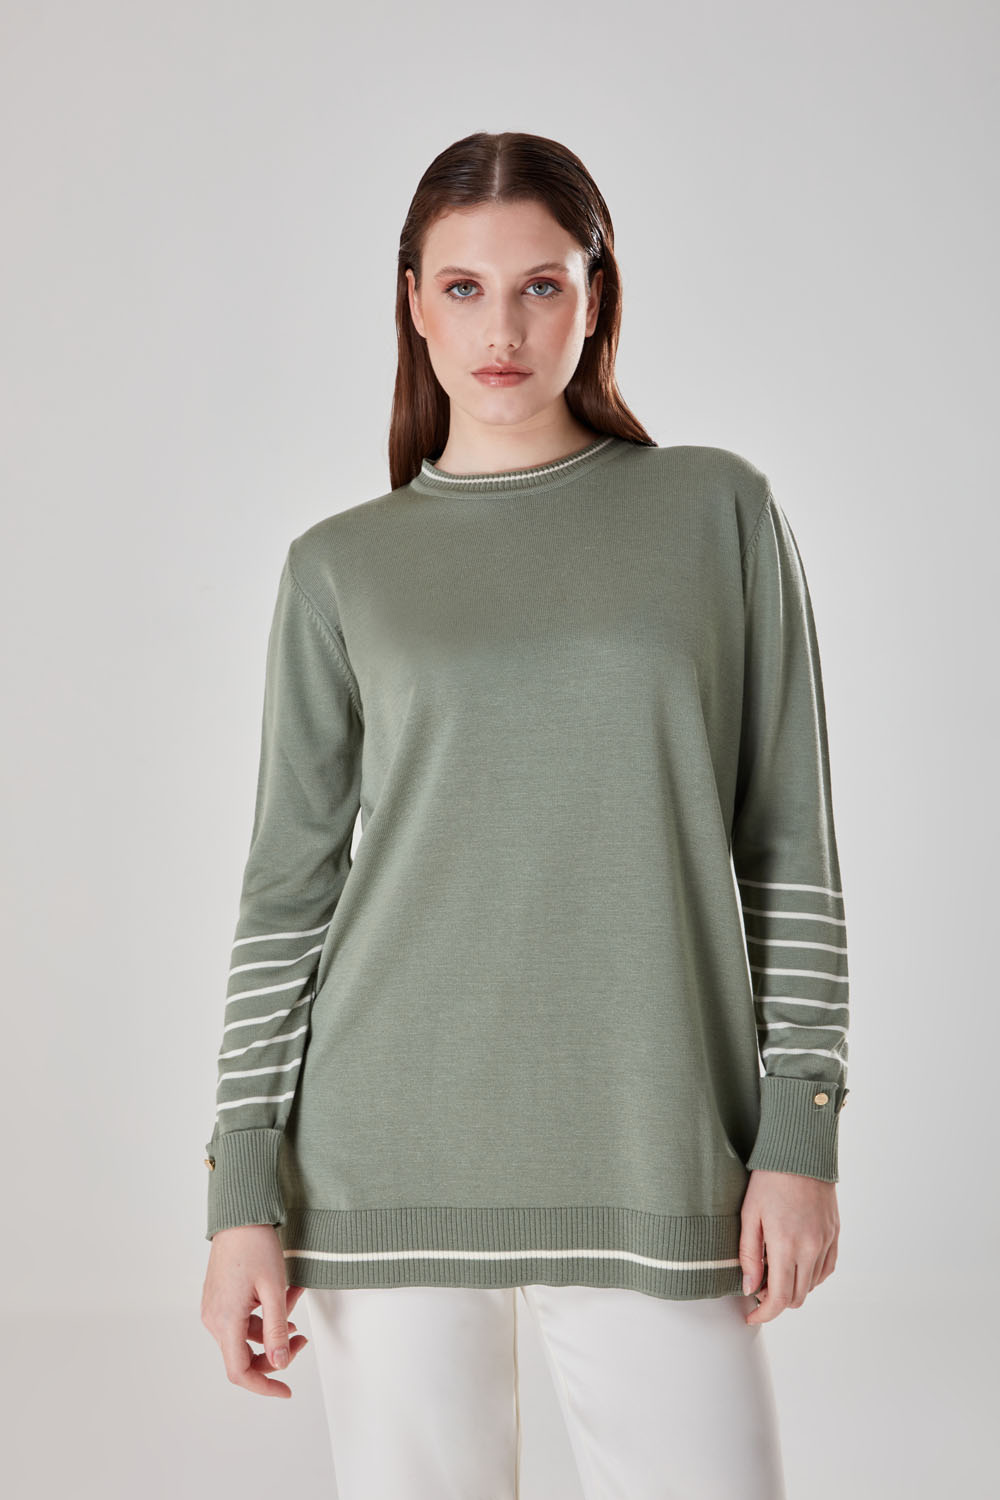 Mint Knitwear Tunic with Stripe Sleeves Patterned